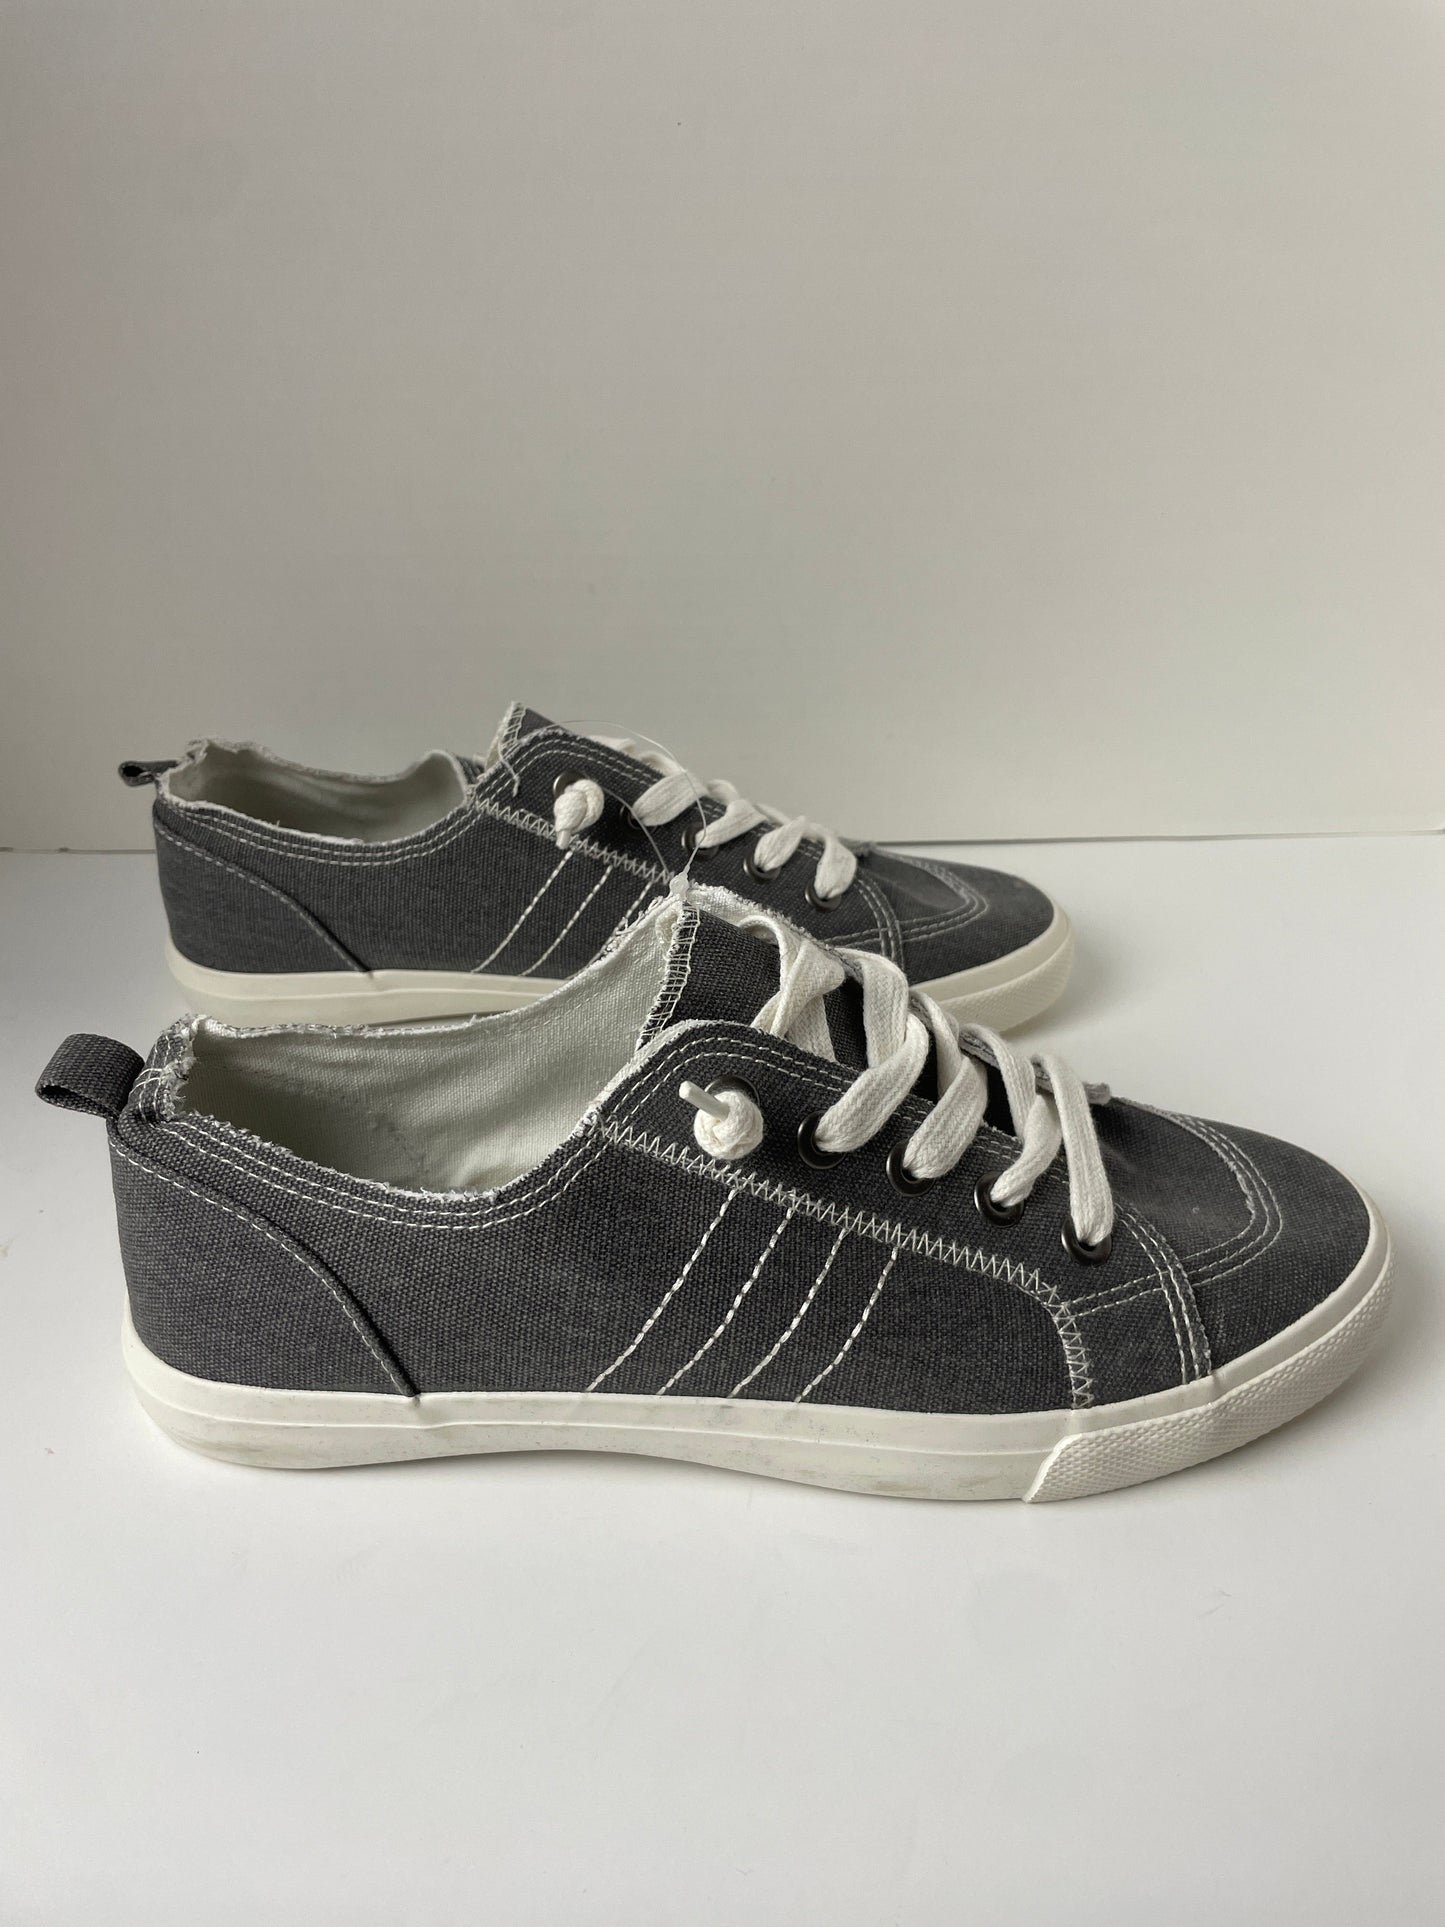 Grey Shoes Sneakers Maurices, Size 11